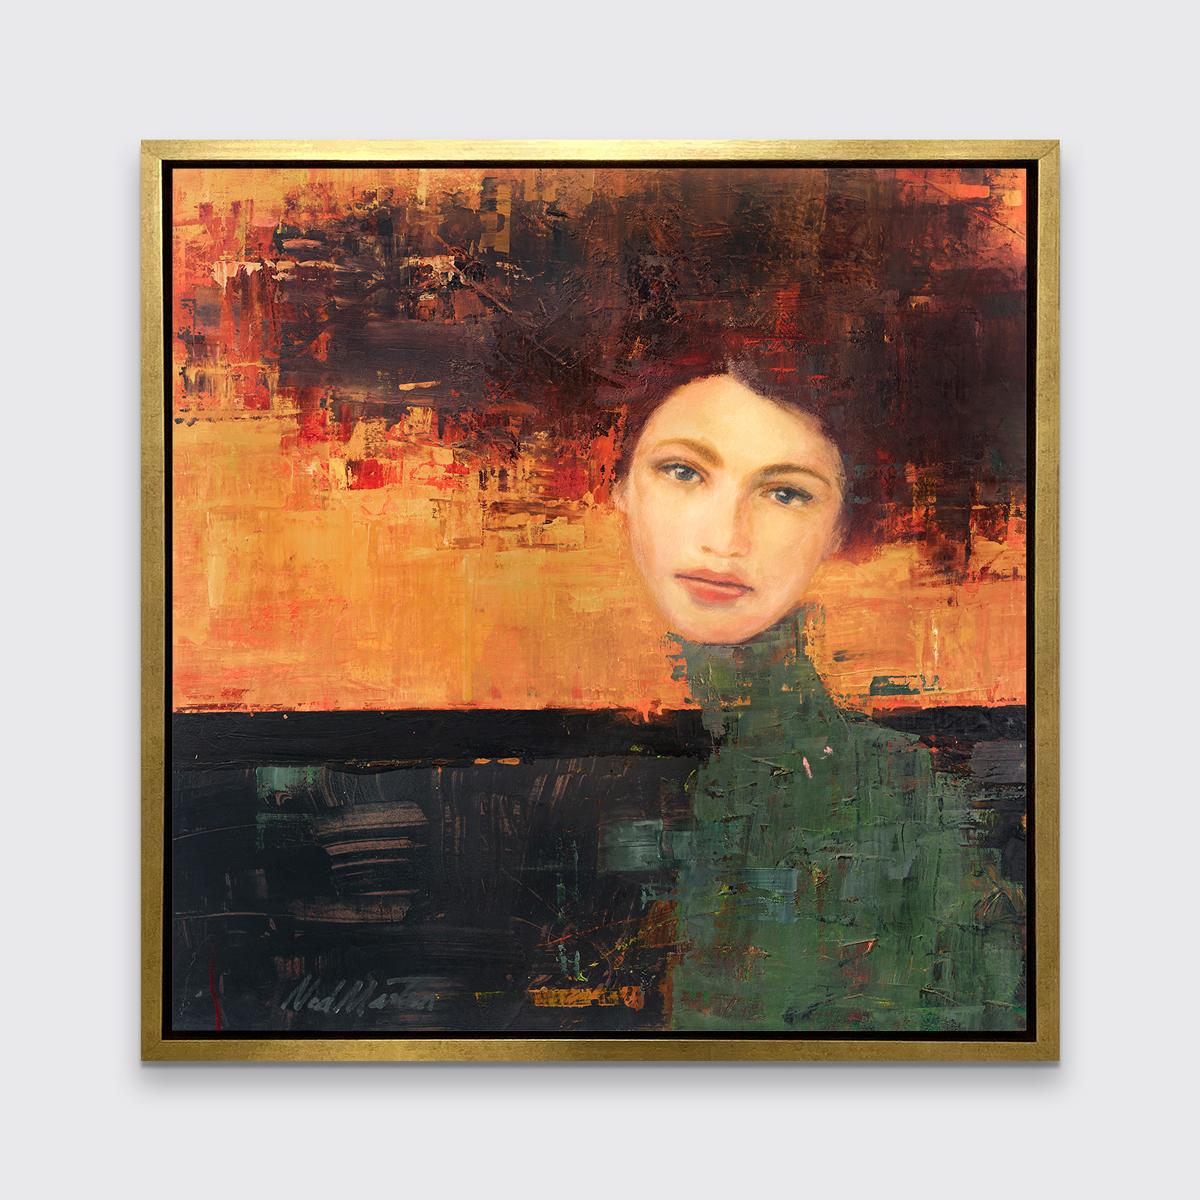 This abstract portrait limited edition print by Ned Martin is part of the artist's Spirits Through Time series. It features a woman's face rendered realistically, with her neck and shoulders and hair abstracted. Her hair fades out to become